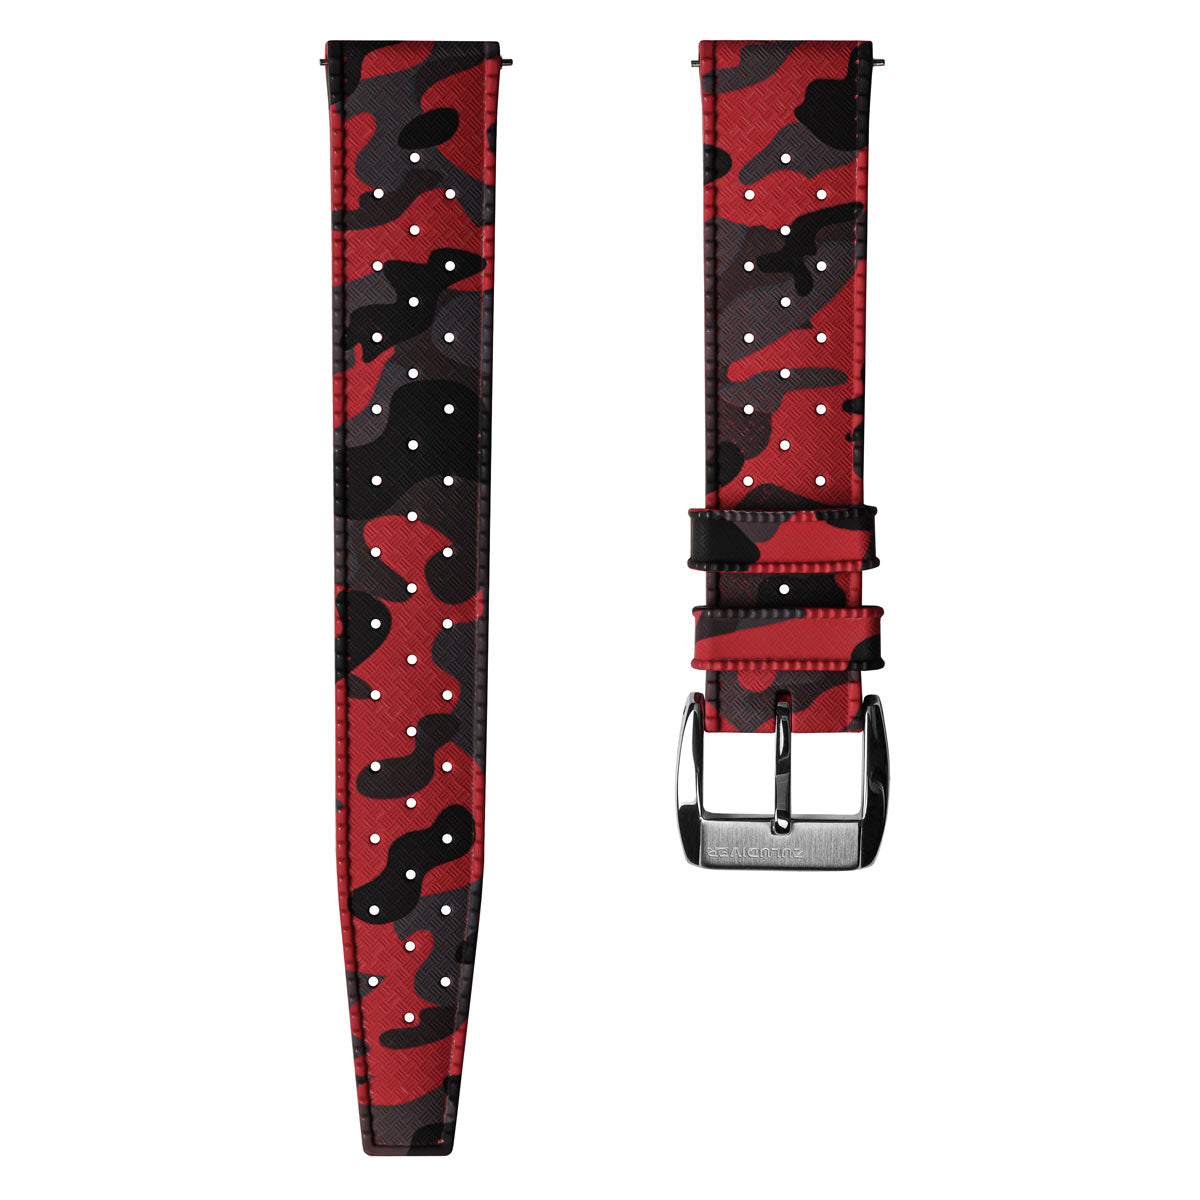 Tropical Style Camo Rubber Watch Strap - Red